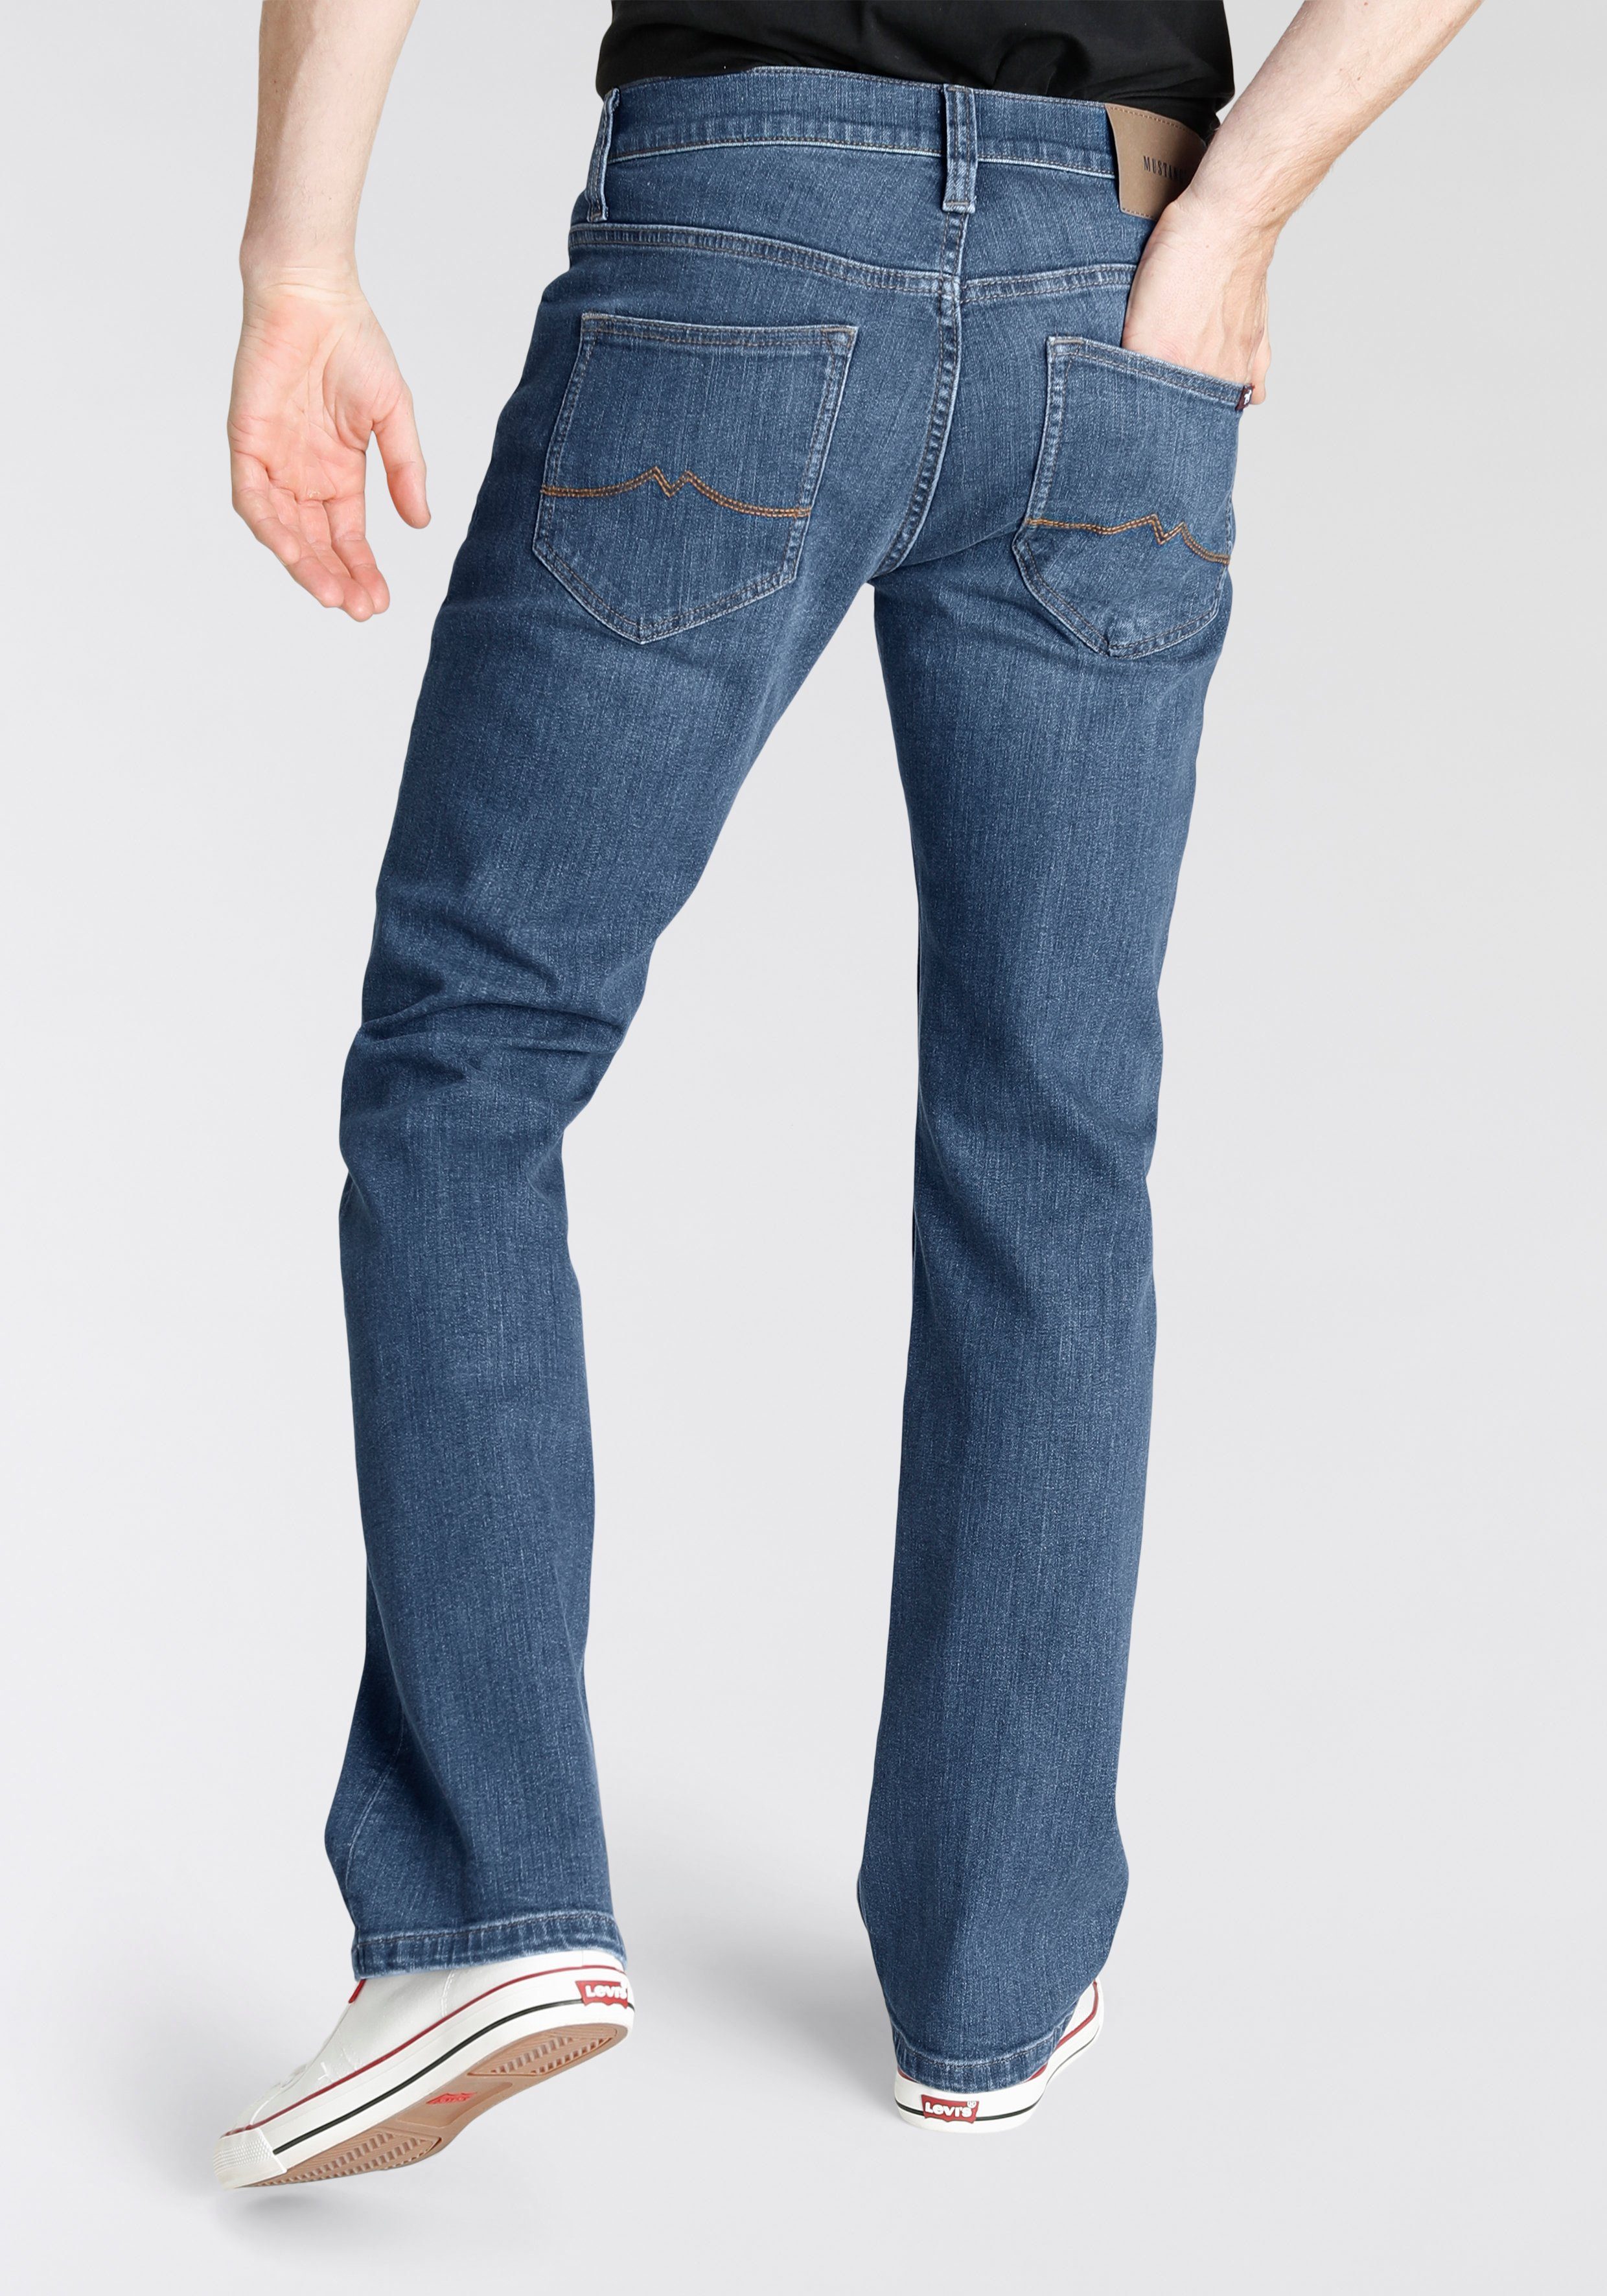 OREGON dark wash Bootcut-Jeans blue STYLE MUSTANG BOOTCUT